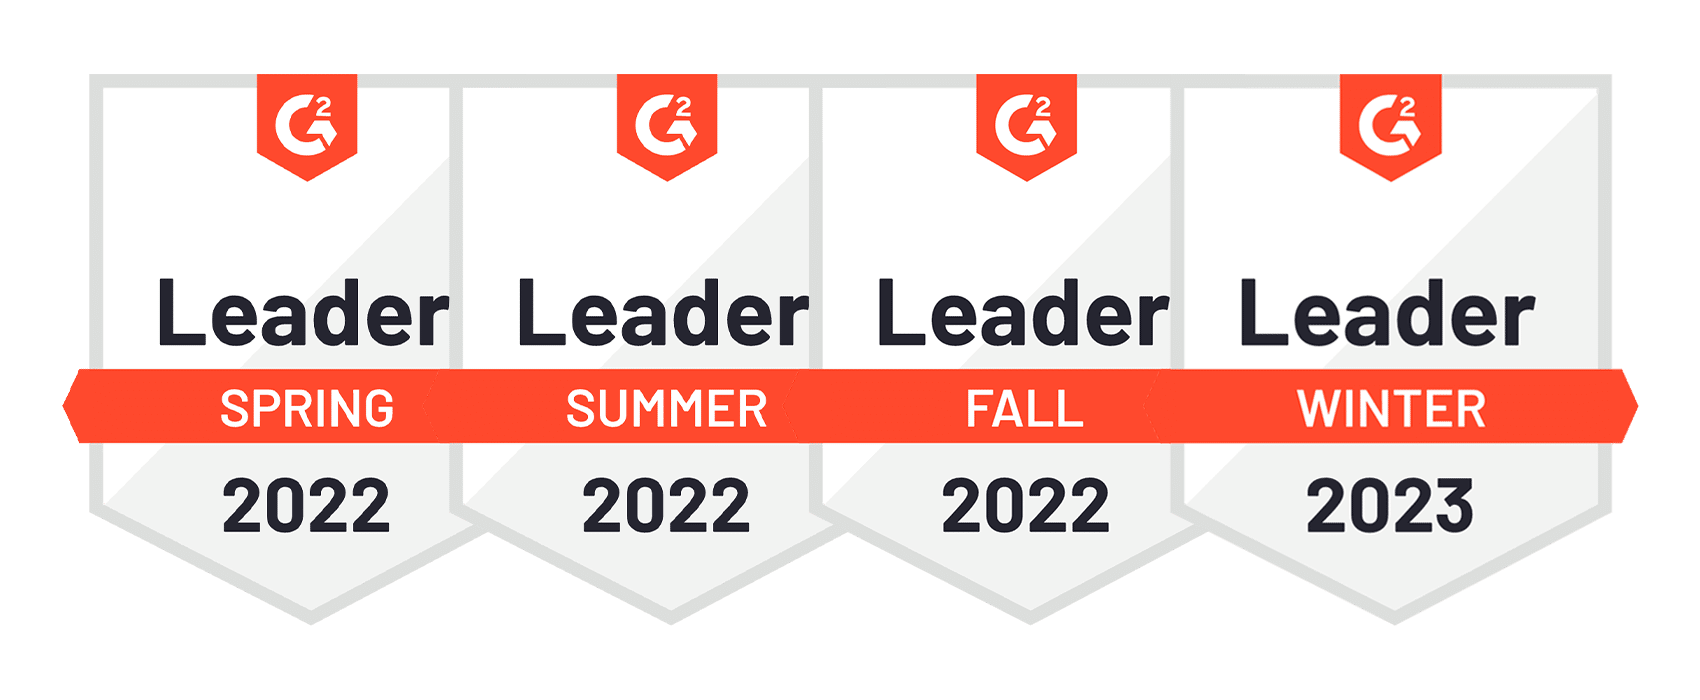 MyCase is awarded Industry Leader in Legal Document Drafting, Legal Case Management, Legal Practice Management, and Legal Billing by G2 in 2022 and 2023